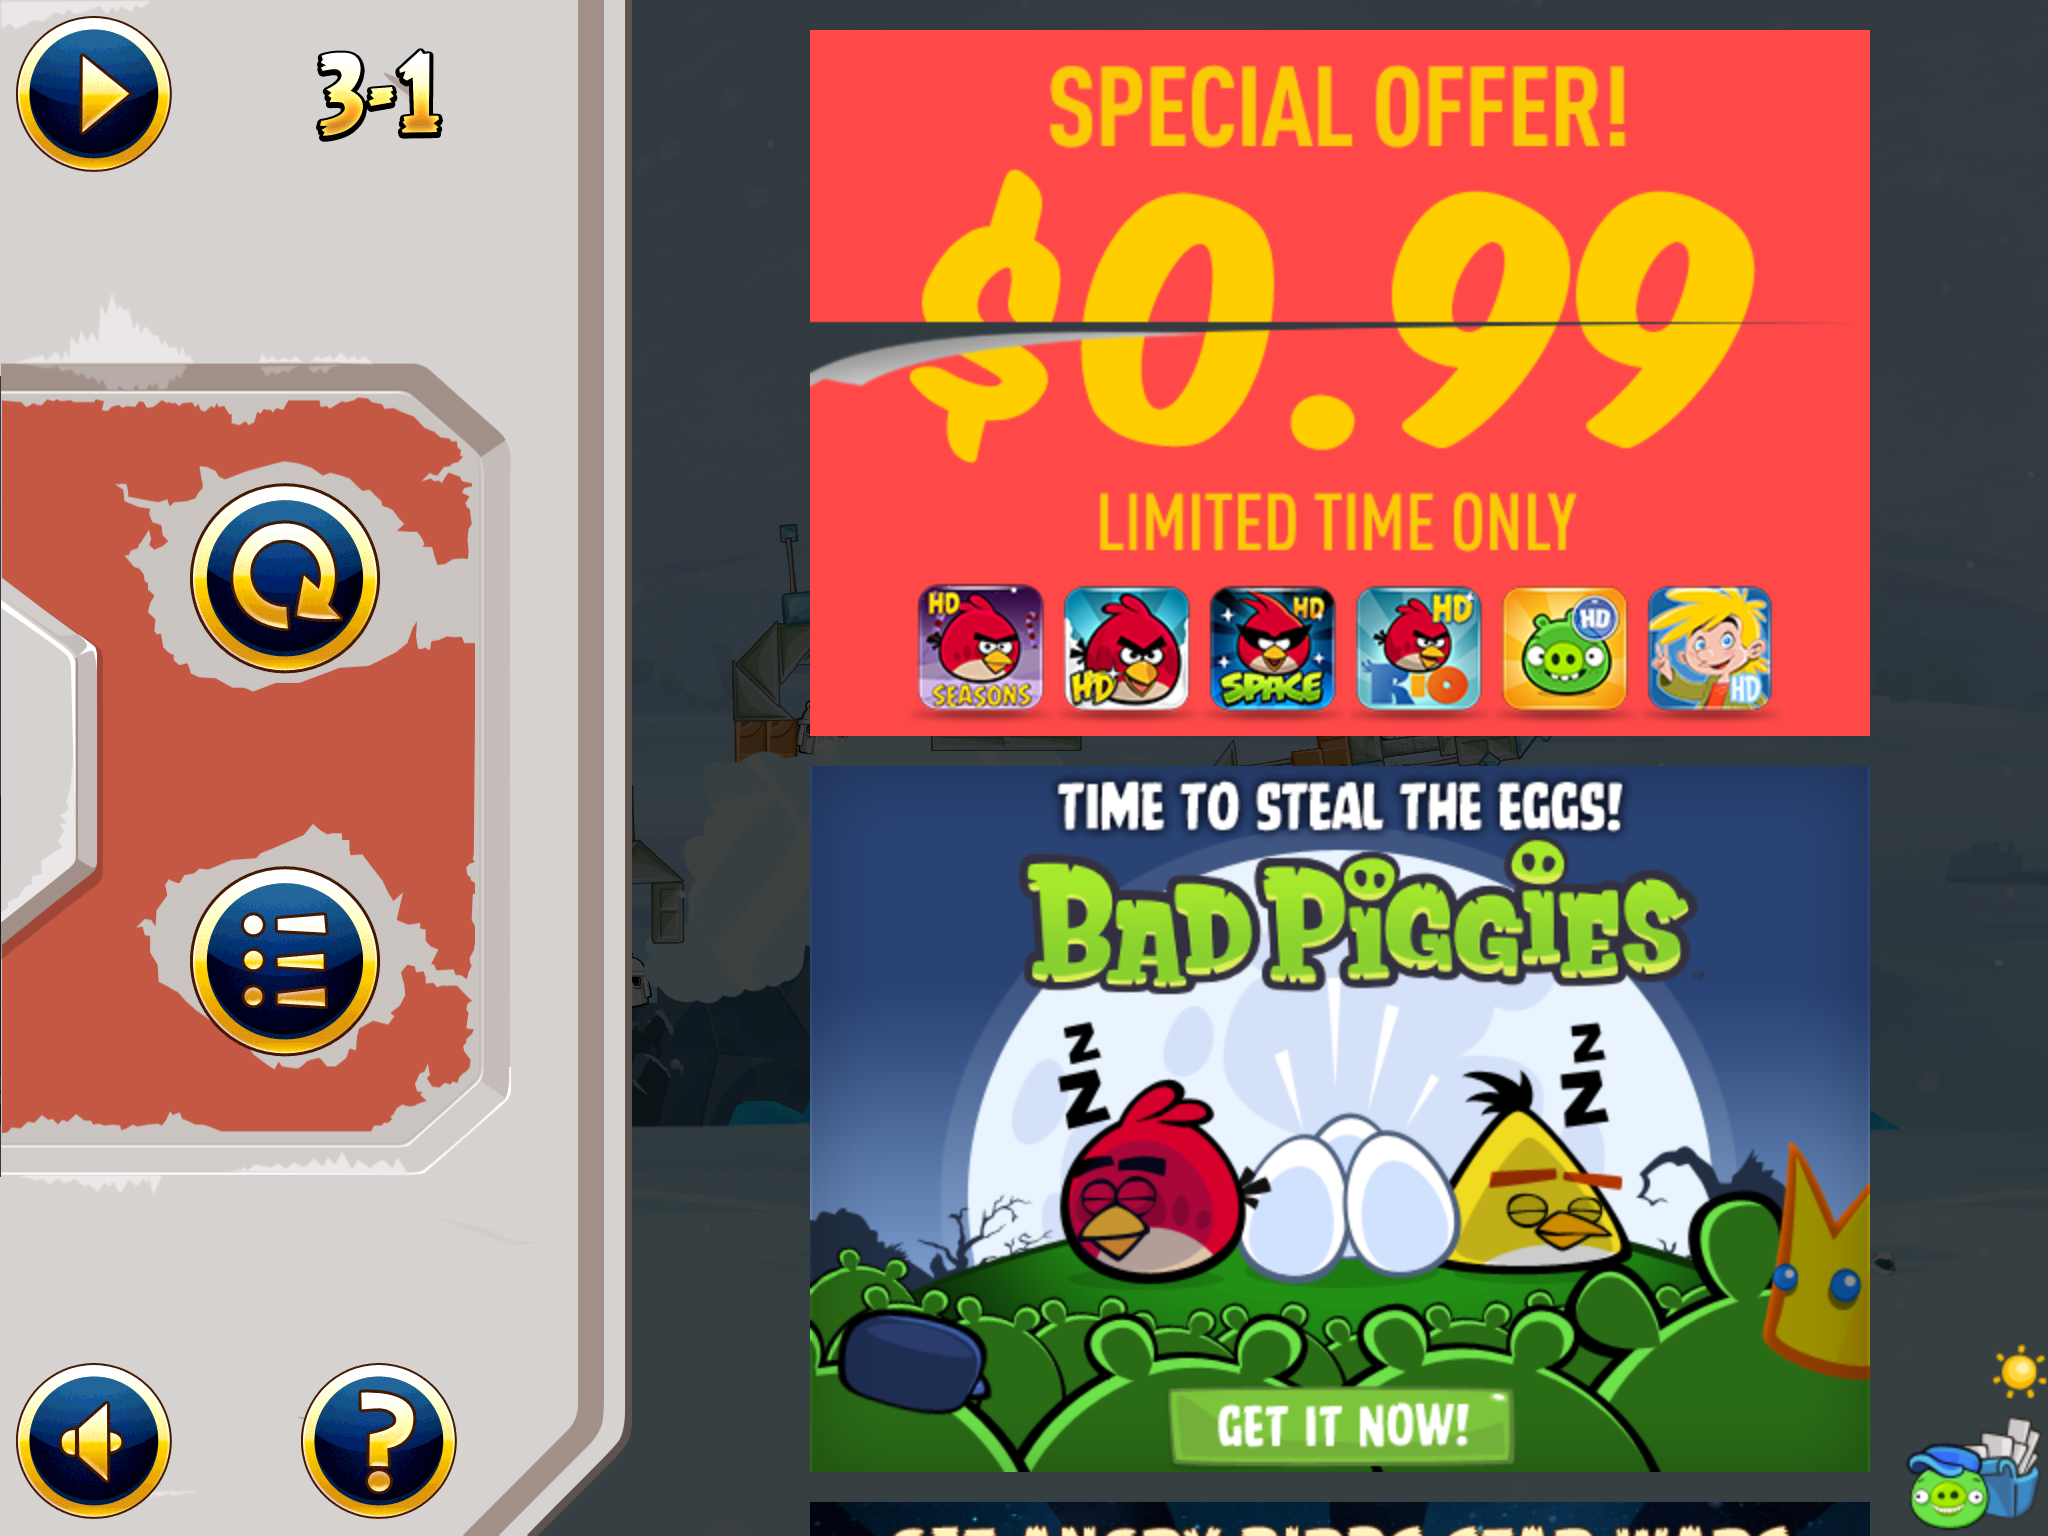 angrybirds - for some reason we don't have an alt tag here